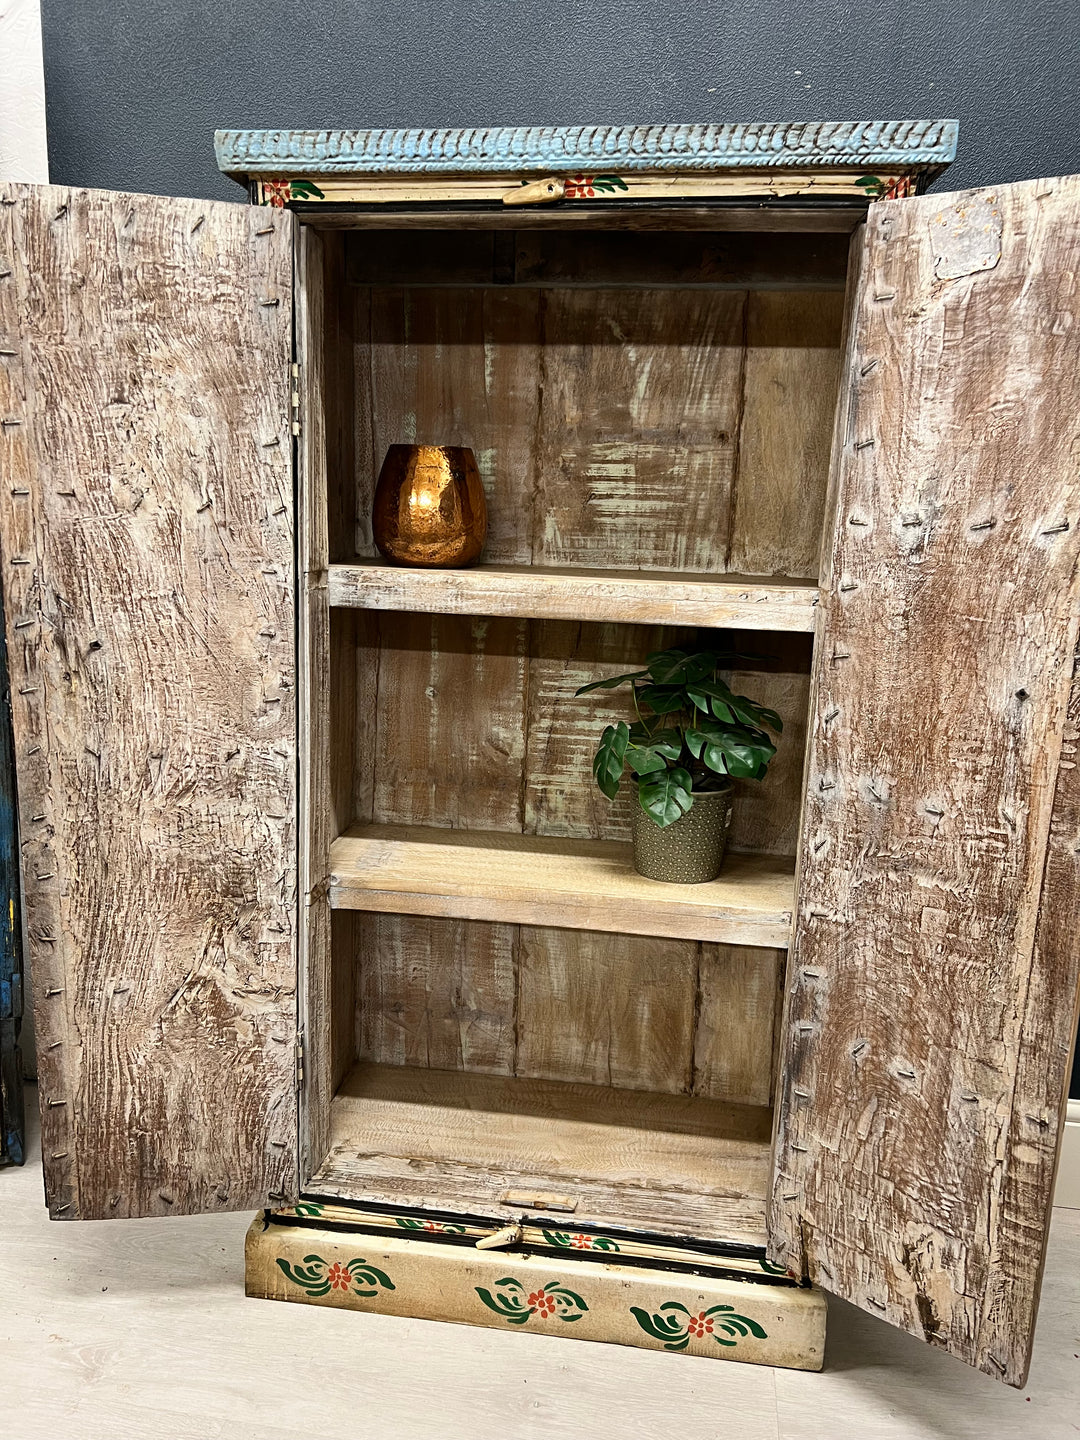 Vintage hand painted cabinet